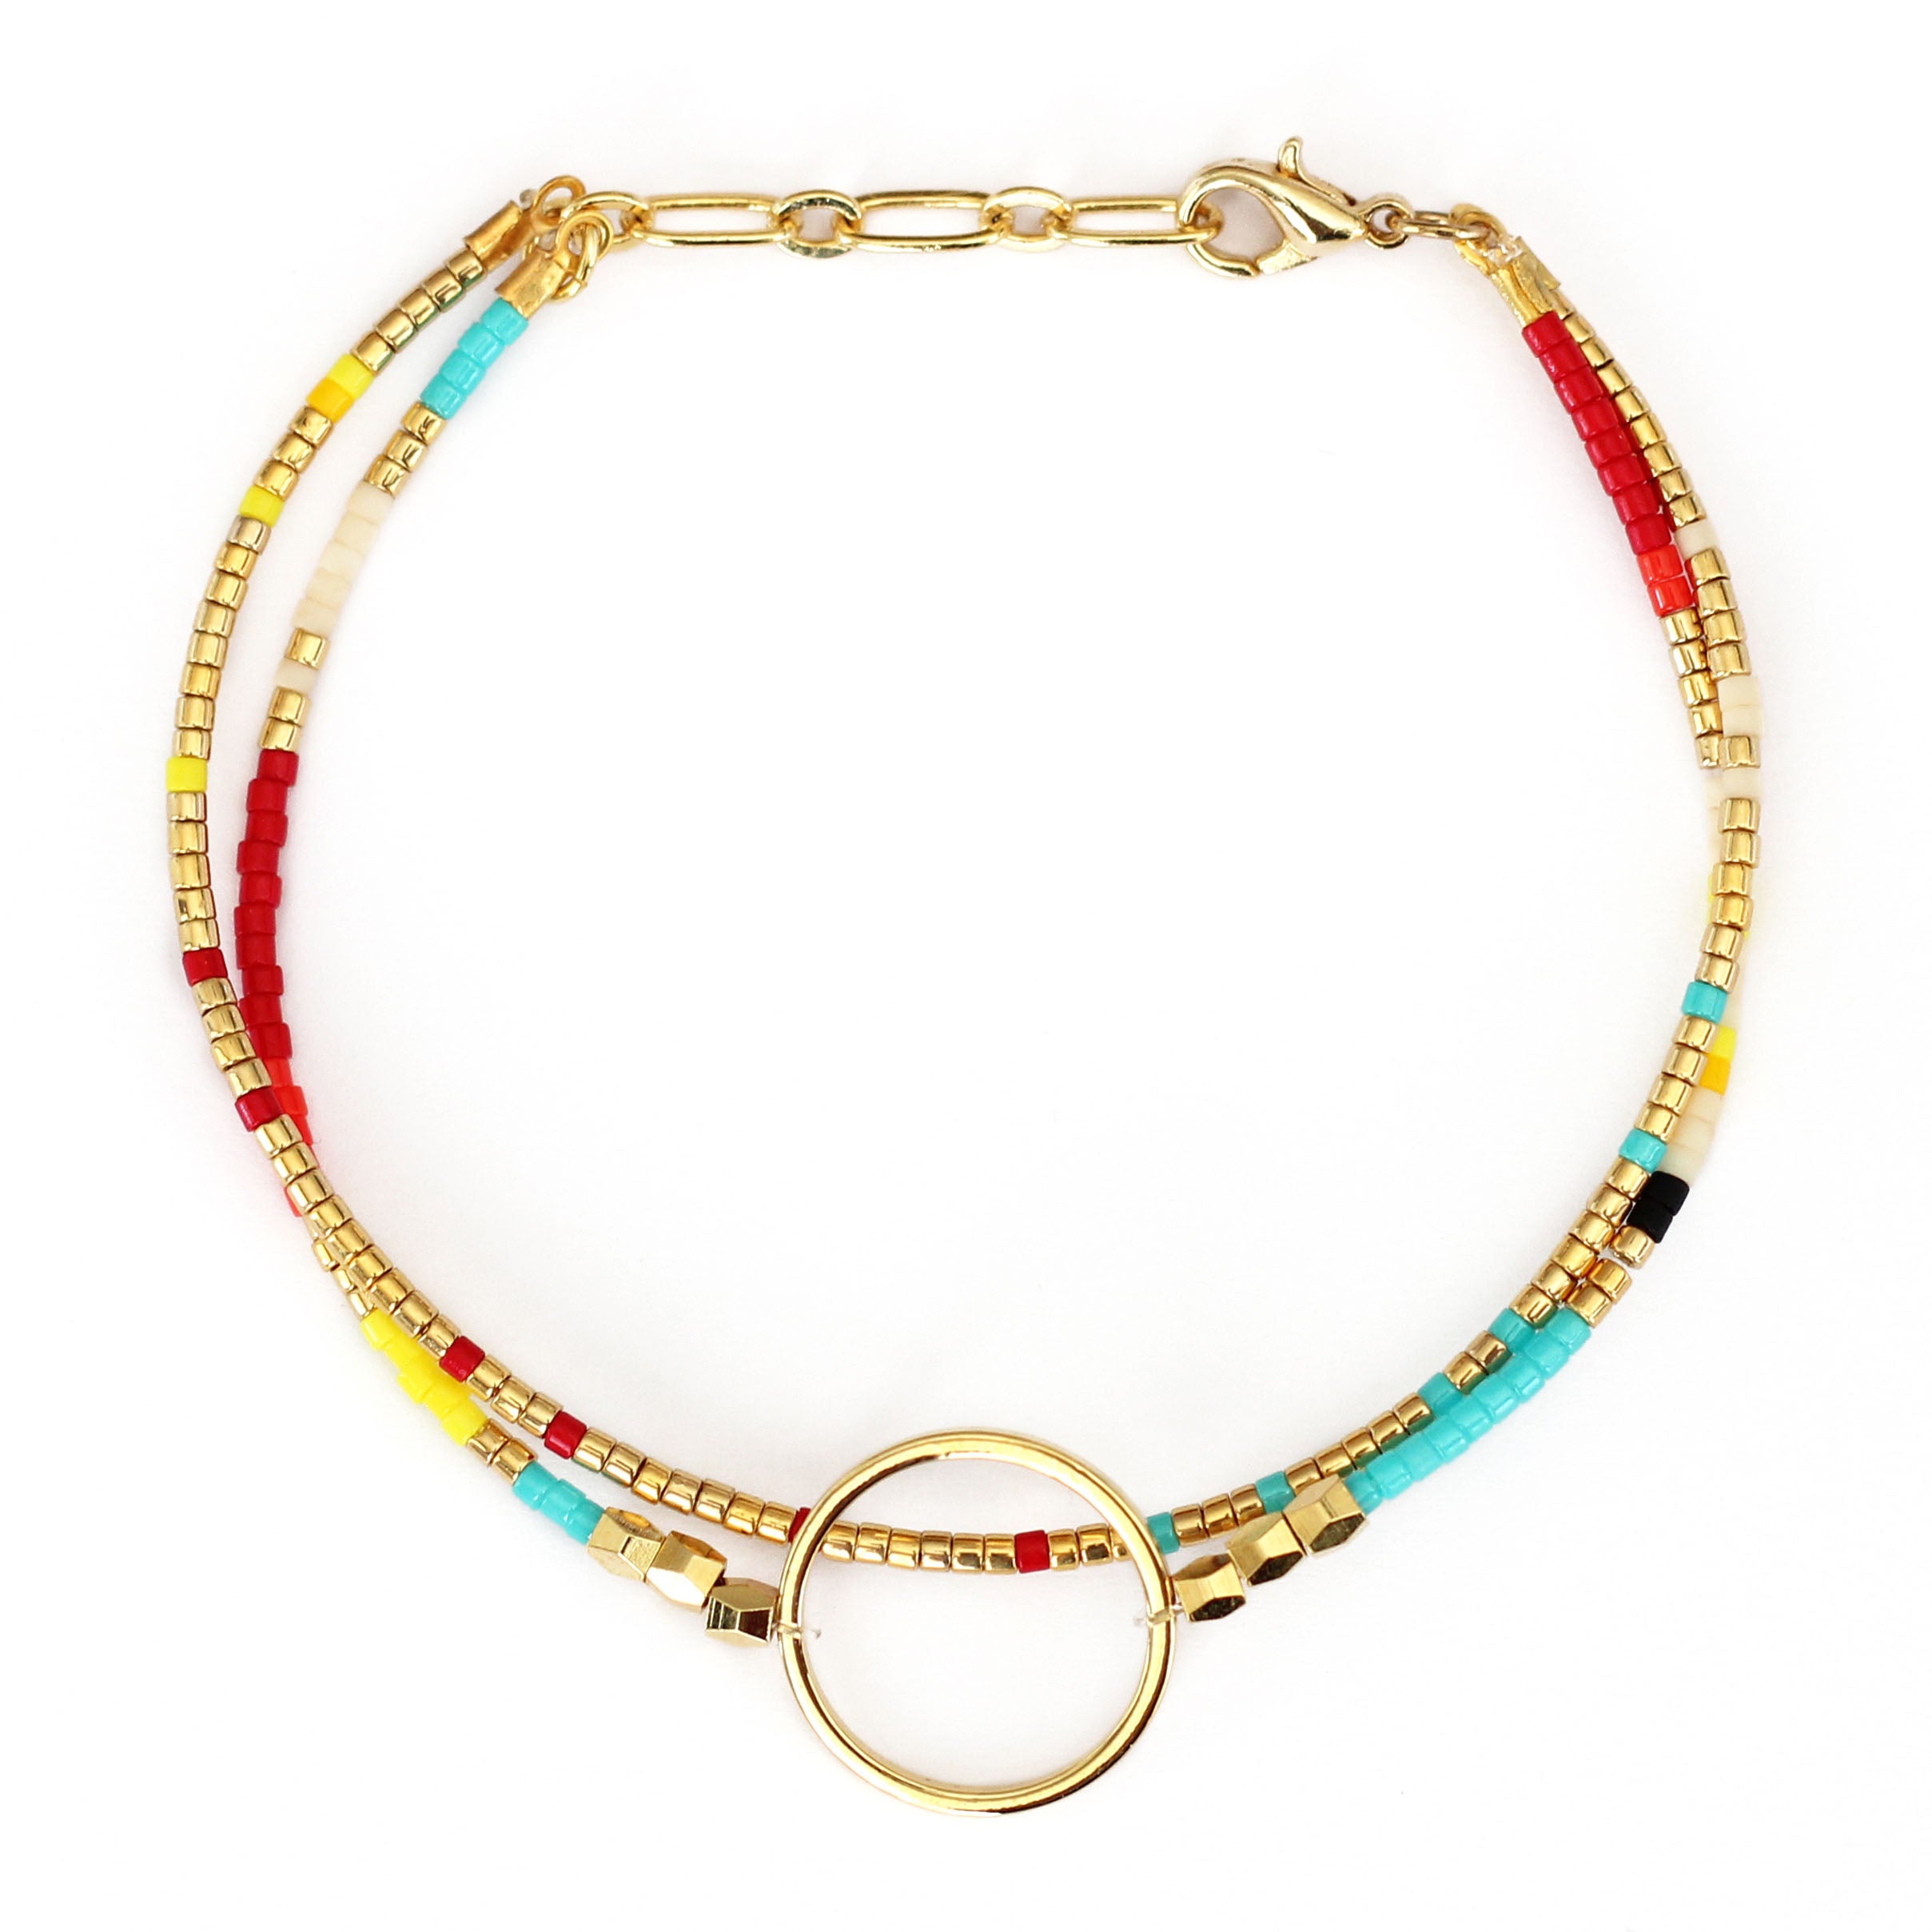 This handmade women's bracelet is a perfect gift idea, featuring Miyuki beads, brass charm, and a pop of turquoise. Stylish gold color, perfect for any occasion, anniversaries, Christmas. A high-quality accessory that will be treasured for years to come.